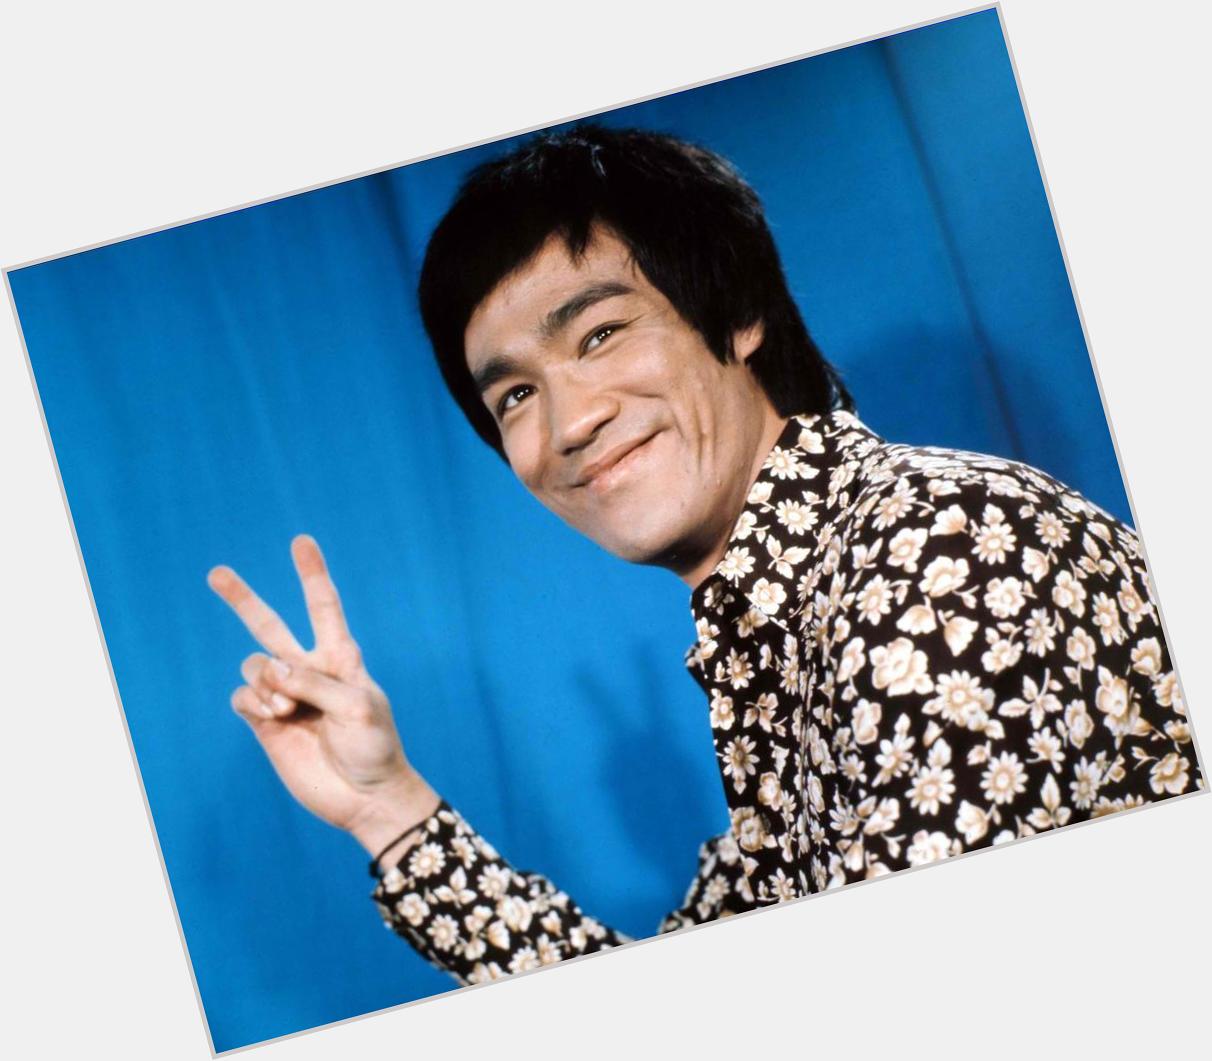 Happy birthday to Bruce Lee who would have been 74 today  